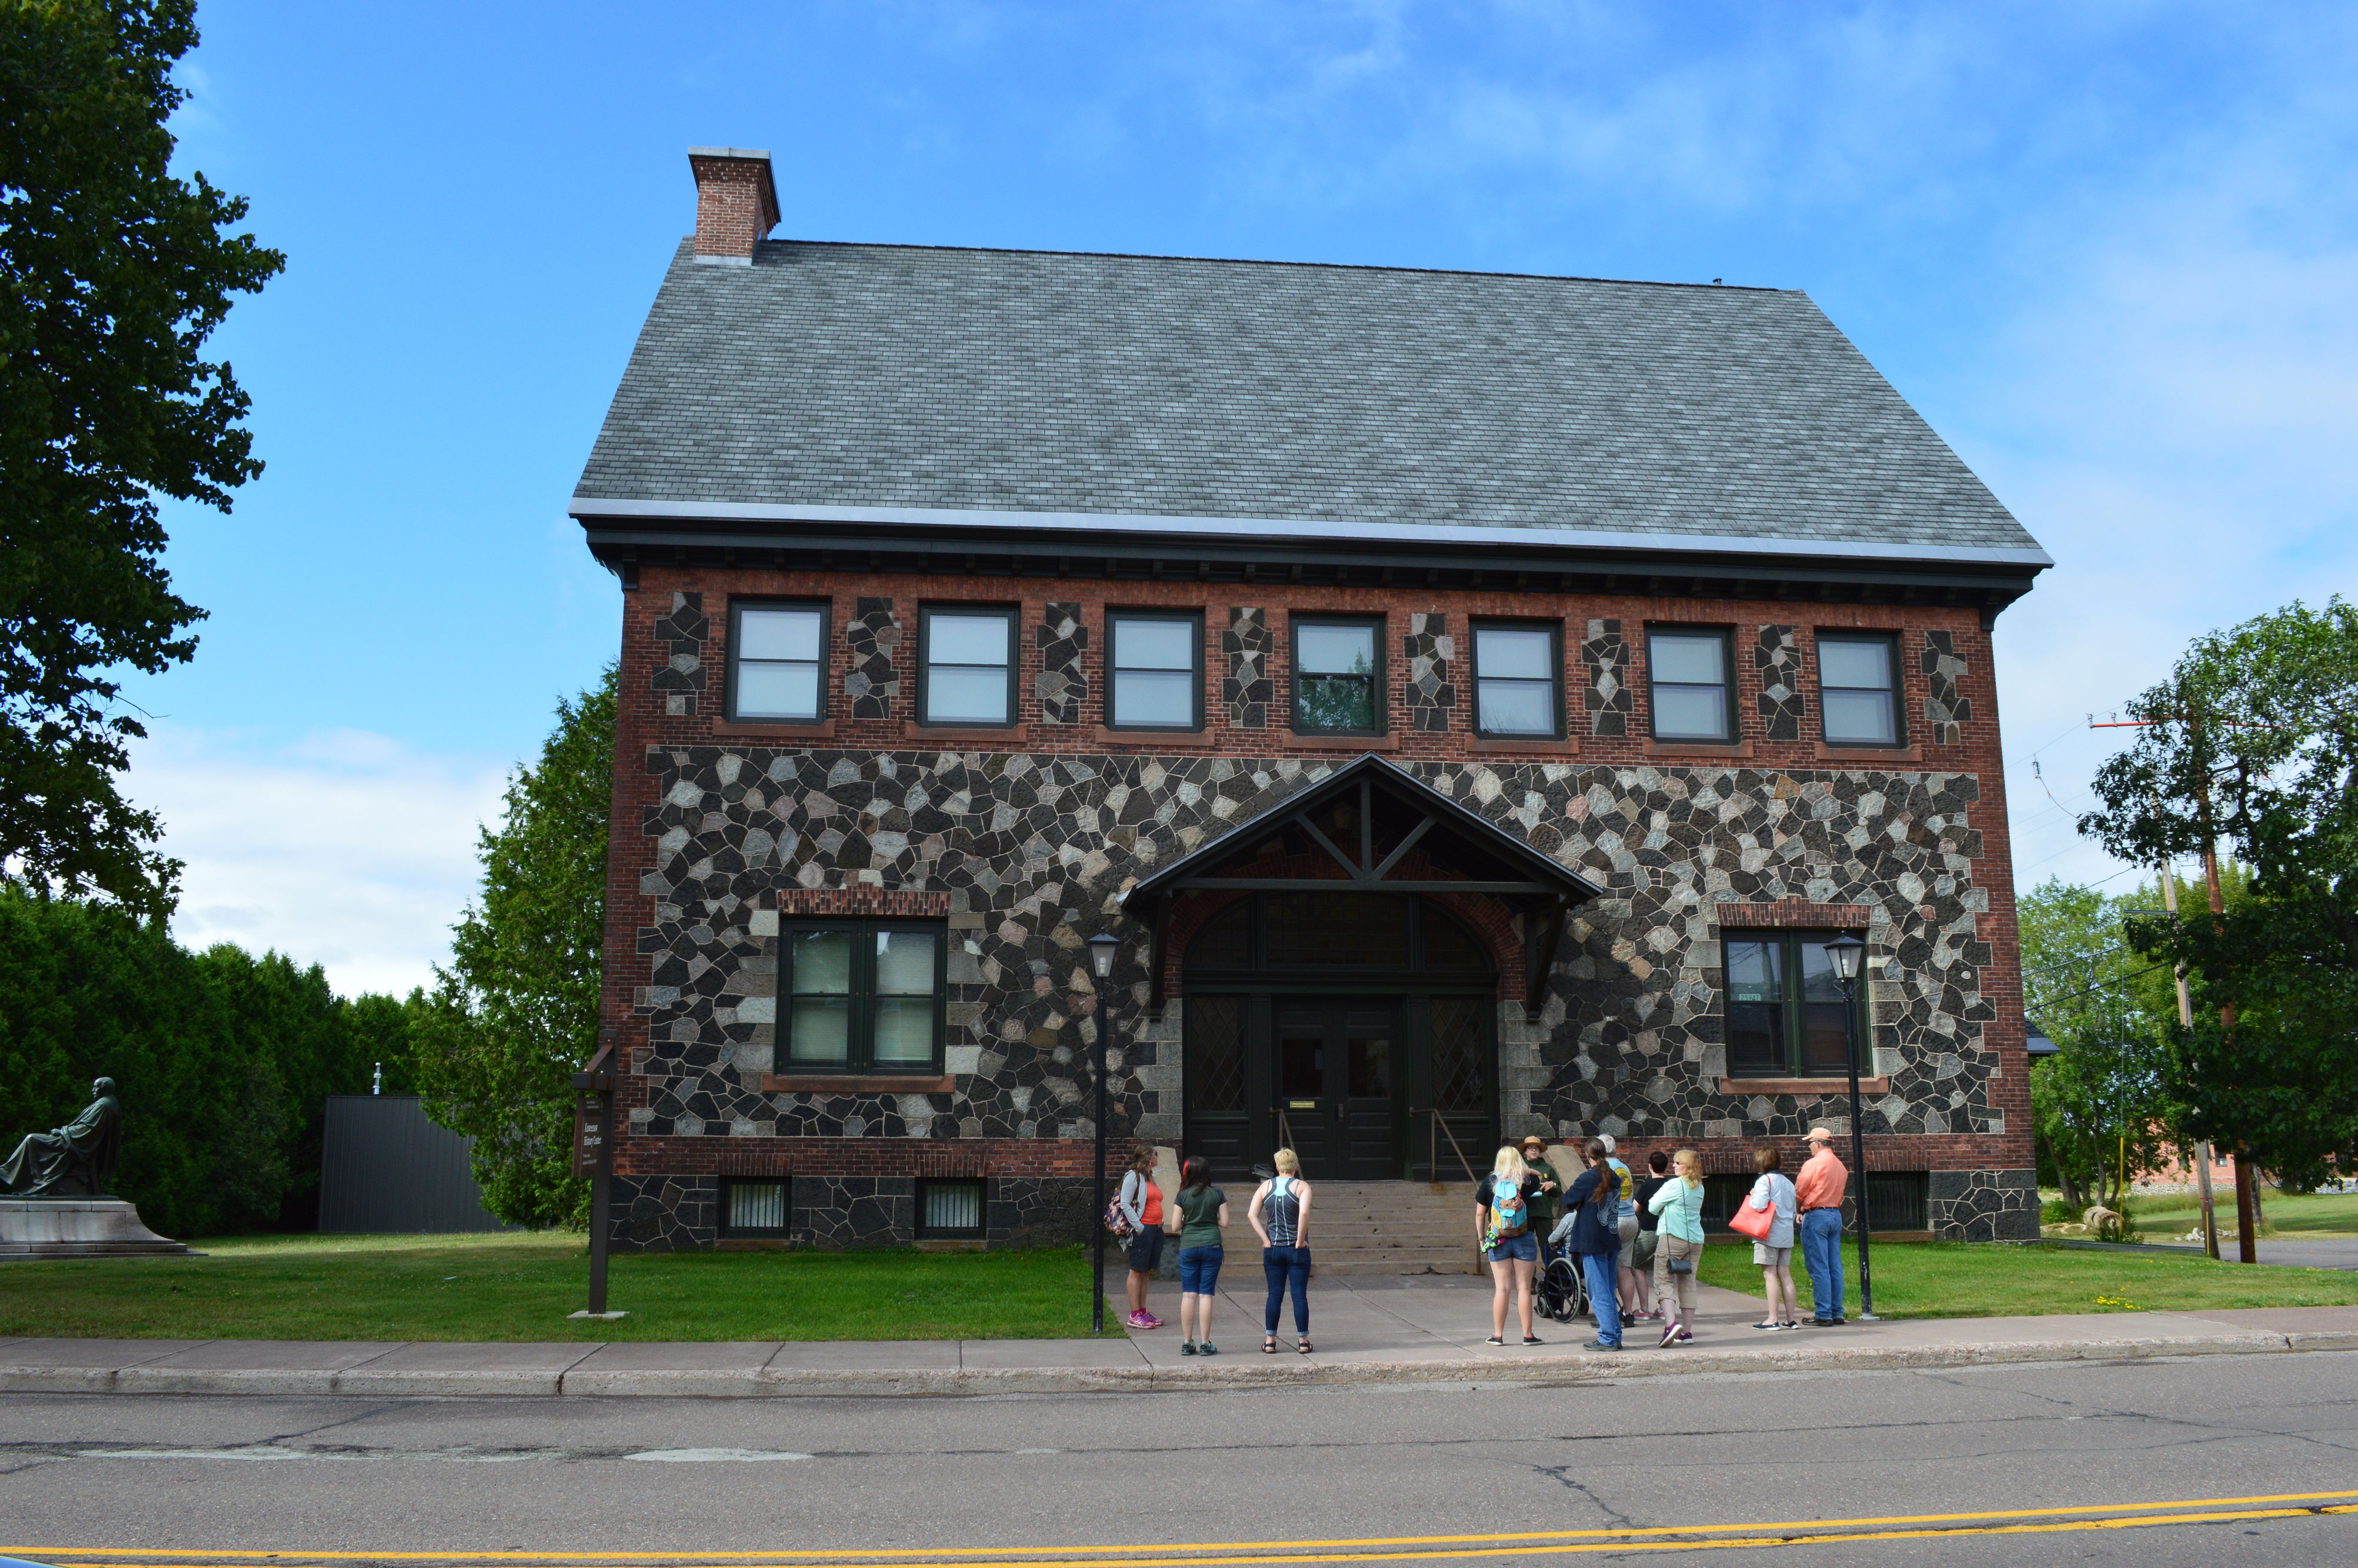 Two story stone and brick building. a ranger leads a group of visitors in front or the steps